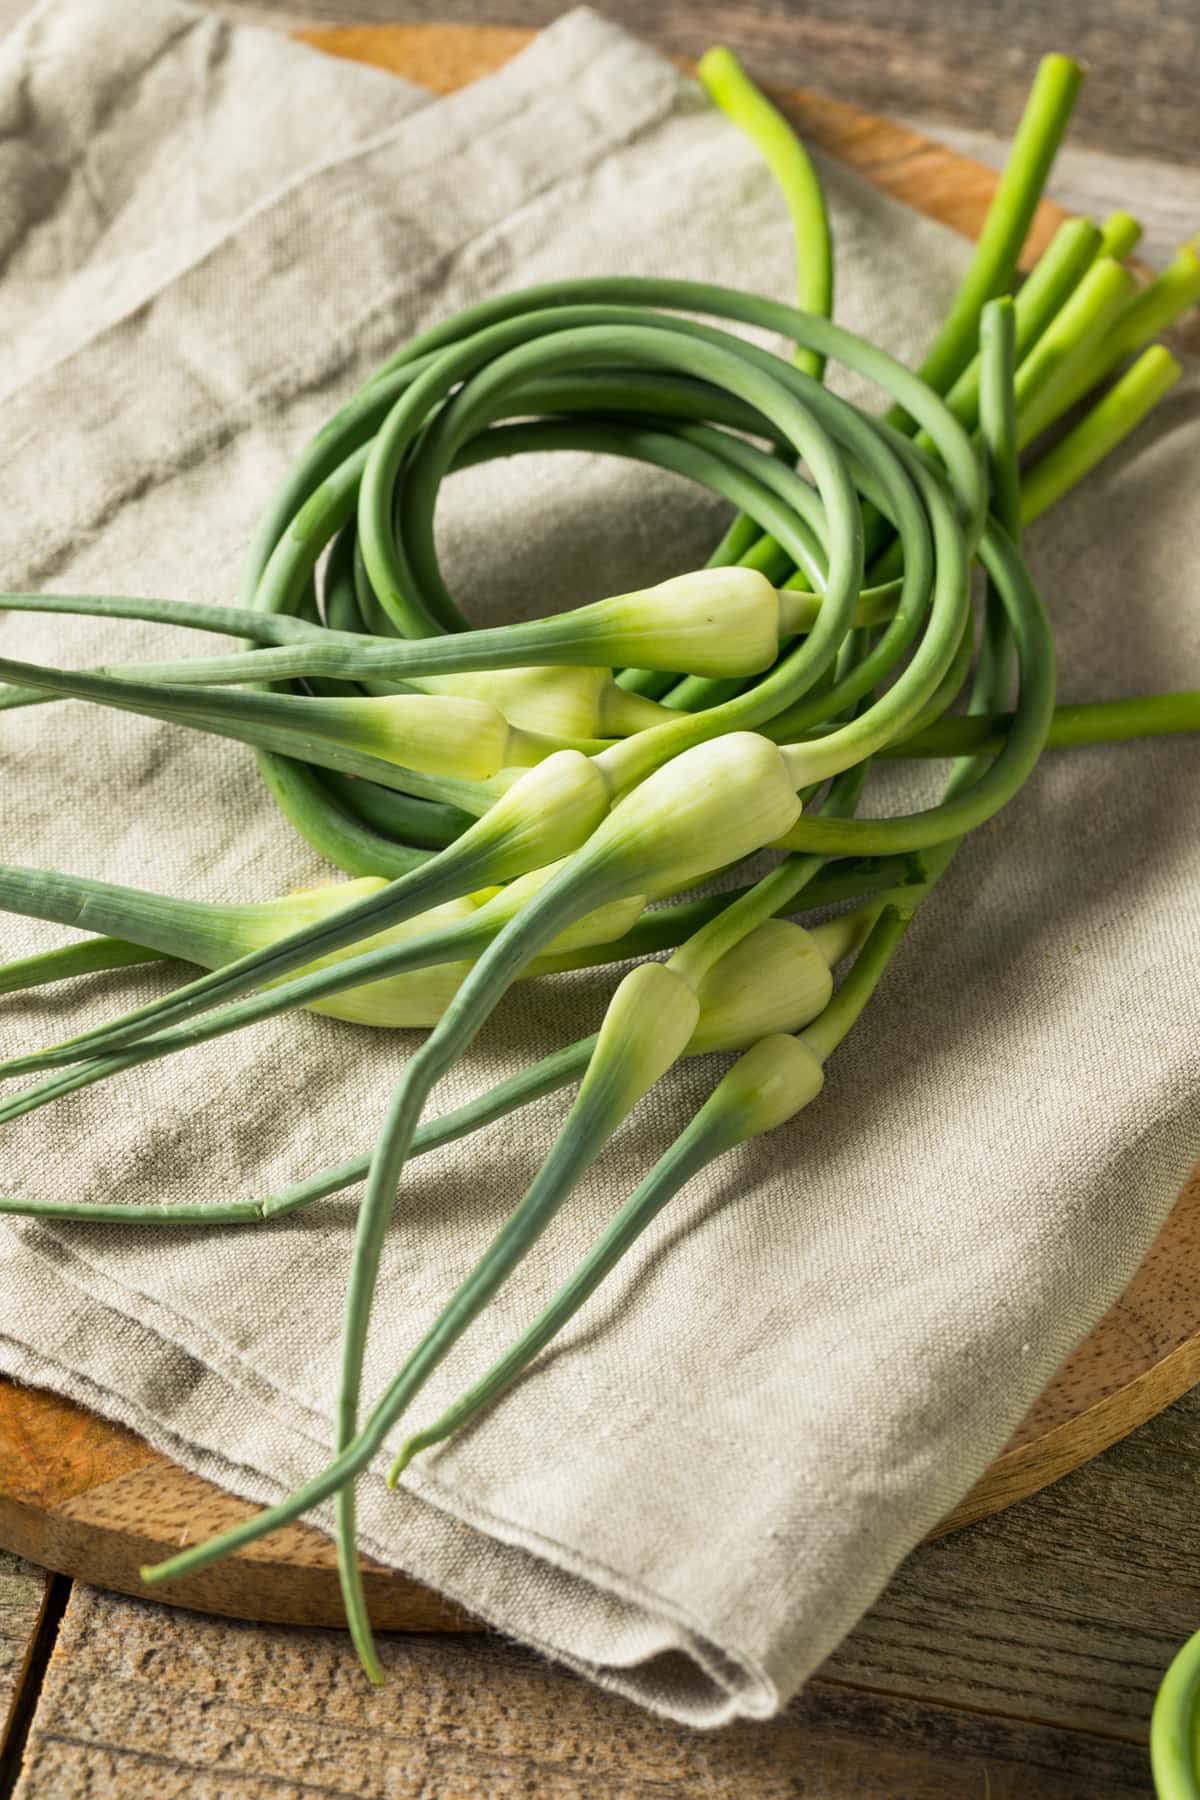 garlic scapes harvested and ready to eat